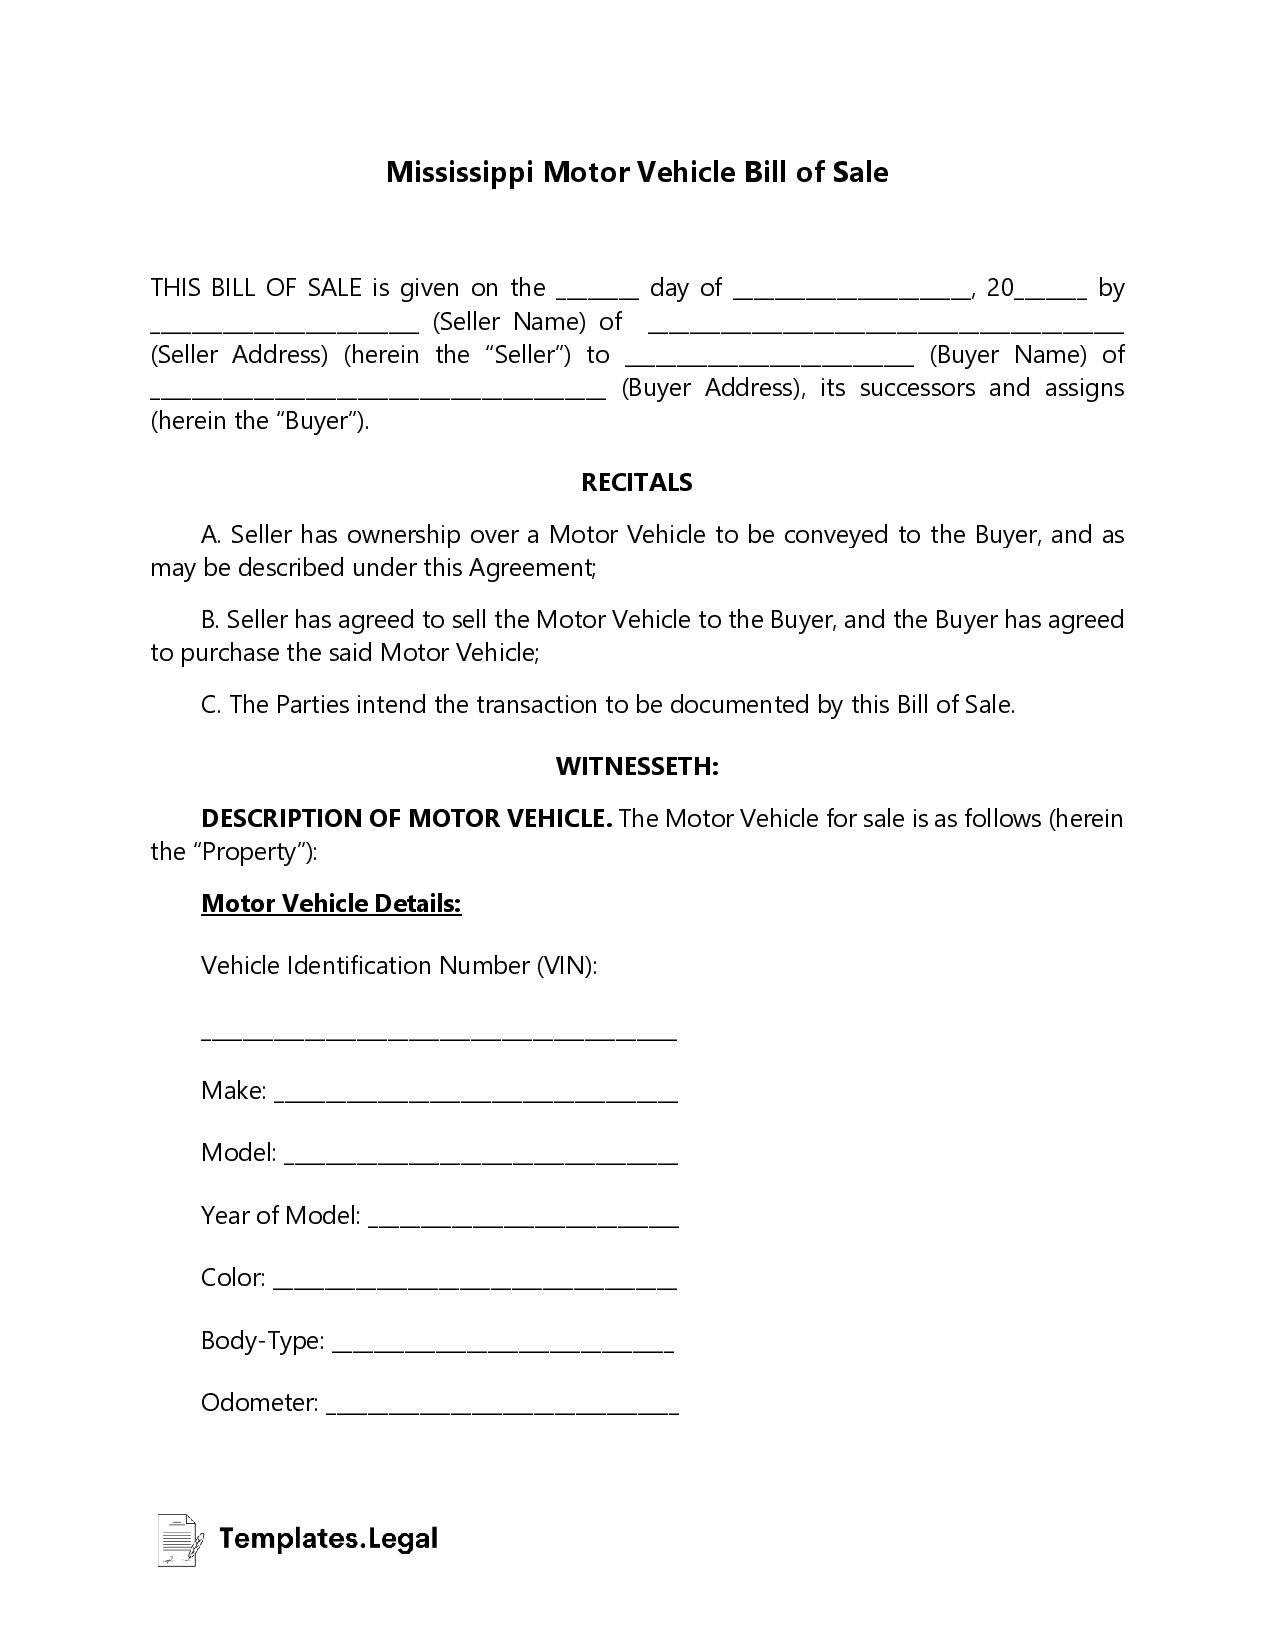 Mississippi Motor Vehicle Bill of Sale - Templates.Legal